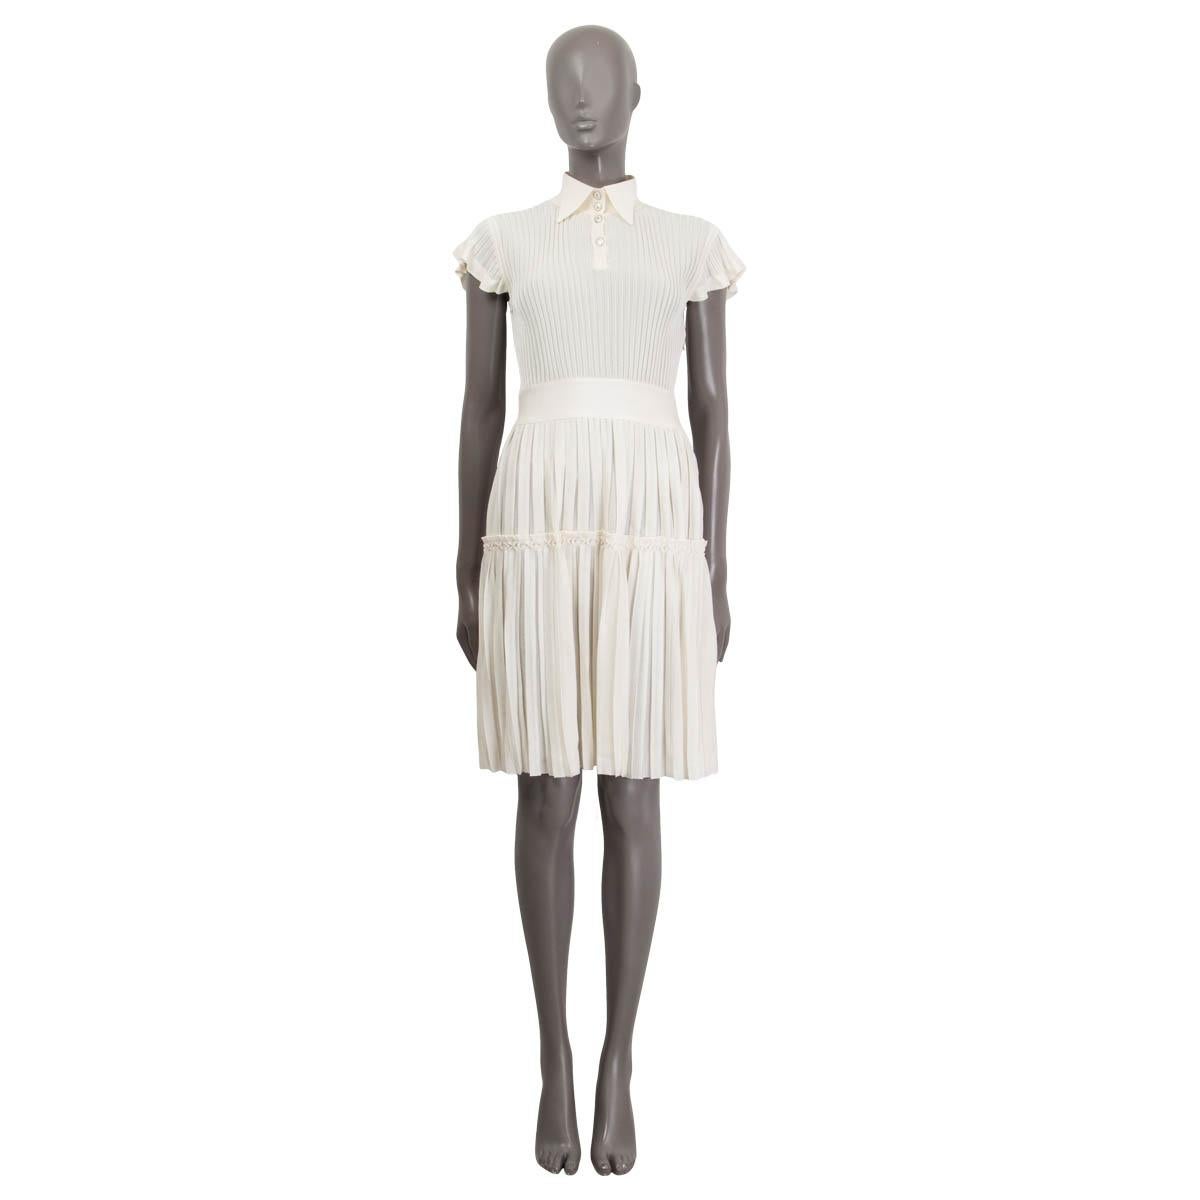 100% authentic Chanel 2018 Pleated Short Sleeve Knit Dress in ivory viscose (76%) and silk (24%) with a wingtip collar and 4 CC logo silver-tone front buttons. Dress has a ribbed top part nad pleated skirt part with a zipper on the side and a slip